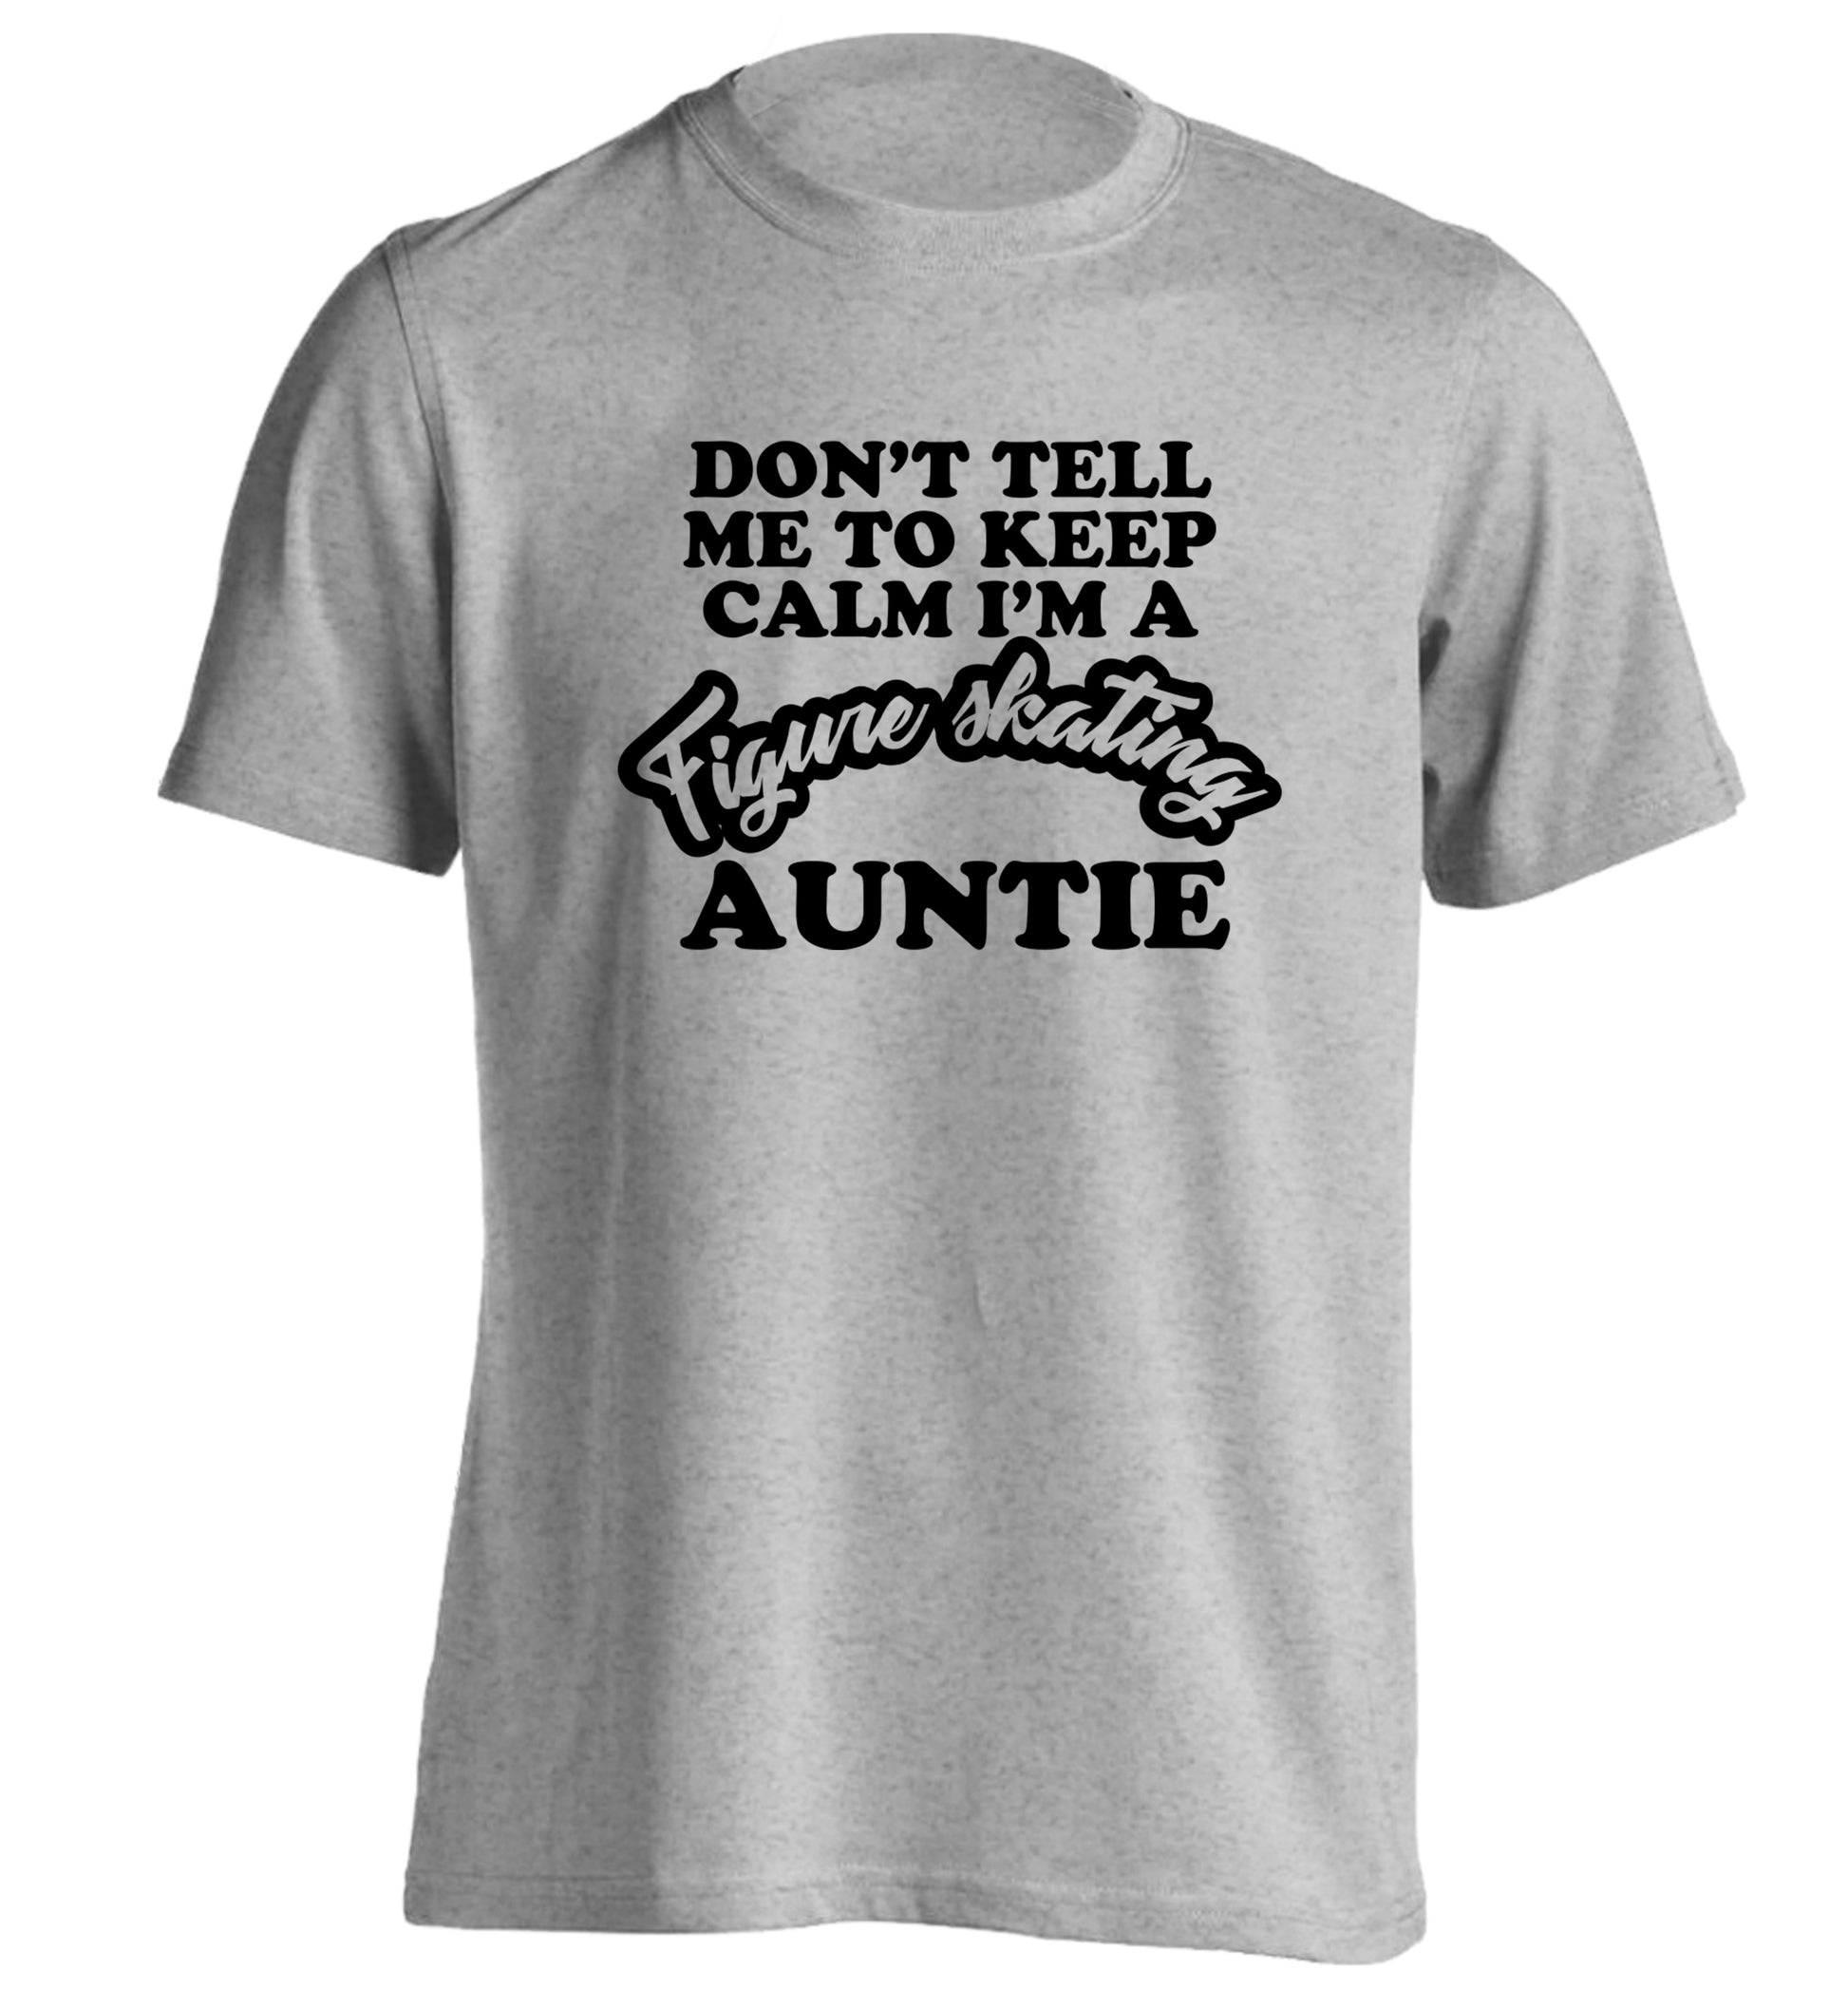 Don't tell me to keep calm I'm a figure skating auntie adults unisexgrey Tshirt 2XL